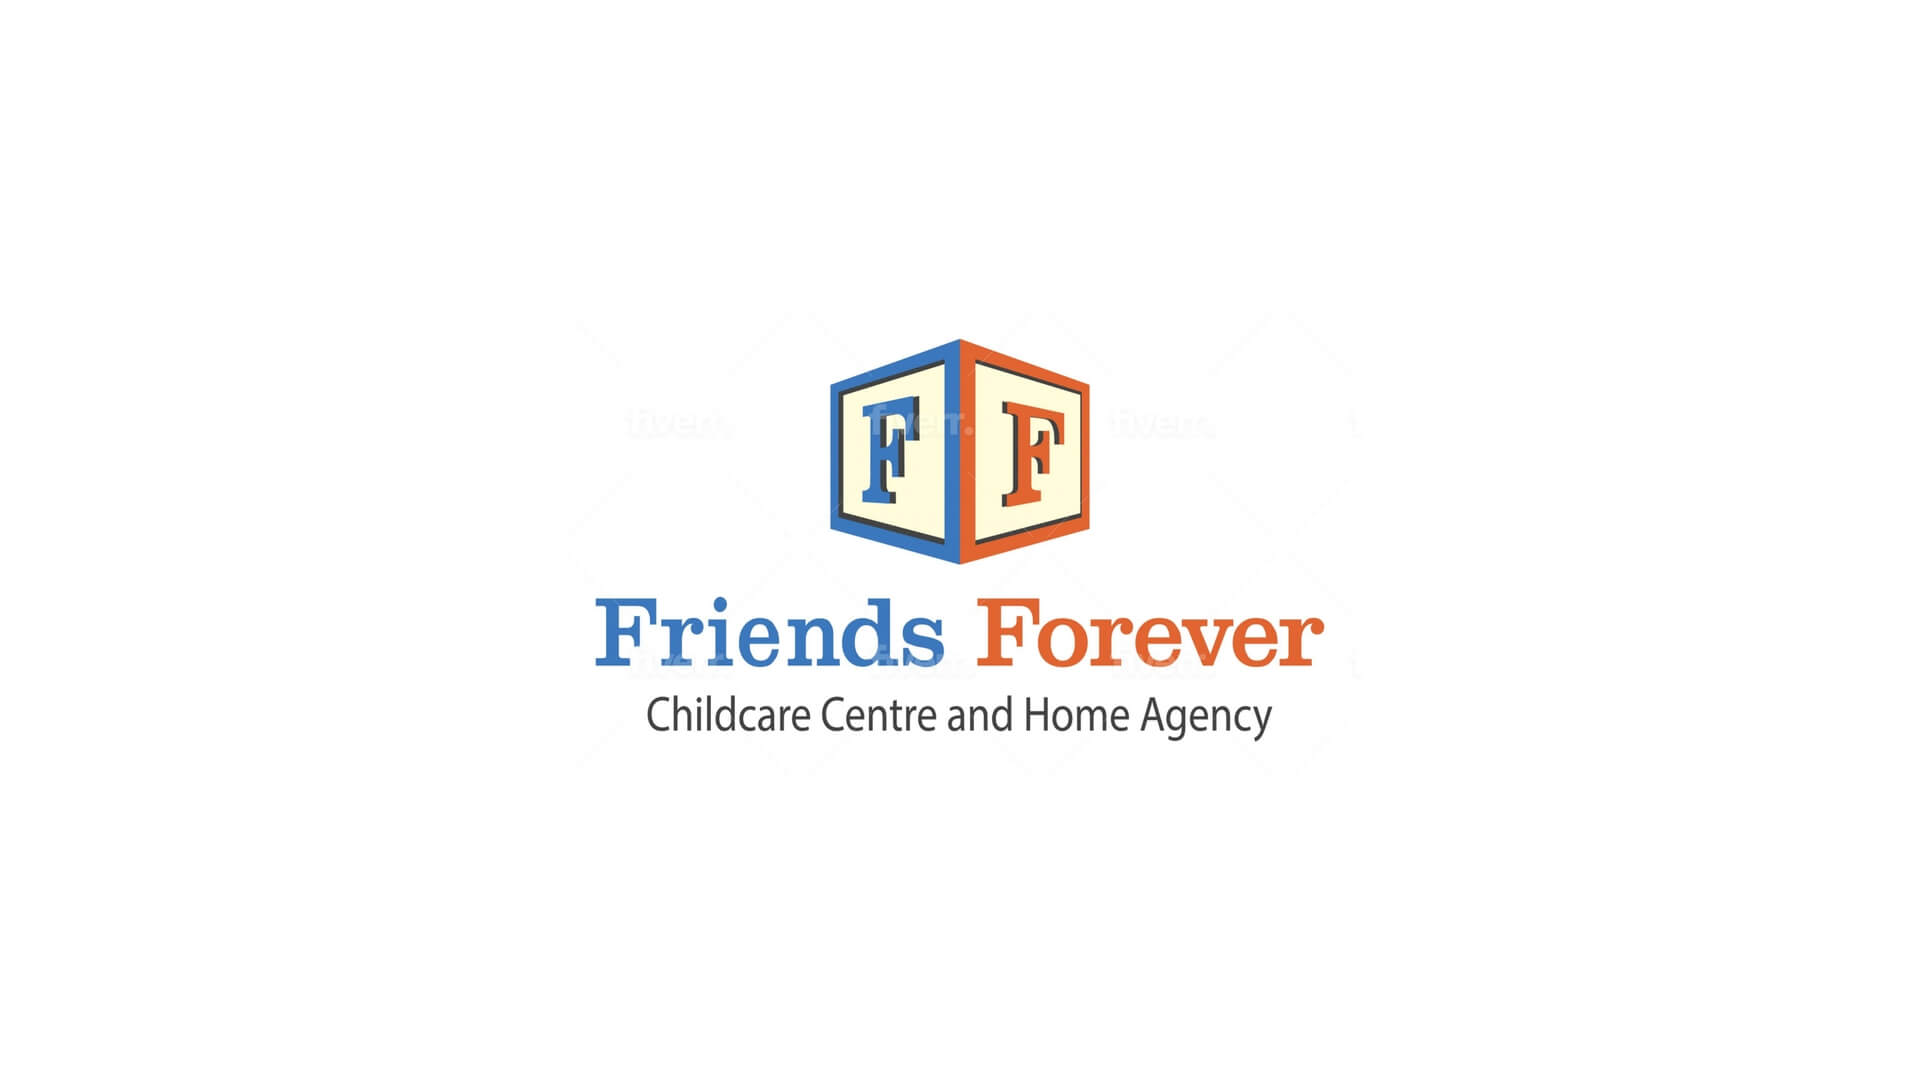 Timmins Care Logo of friends forever childcare centre and home agency, featuring a colorful cube with letters "f" on two visible sides. Cochrane District Social Services Administration Board